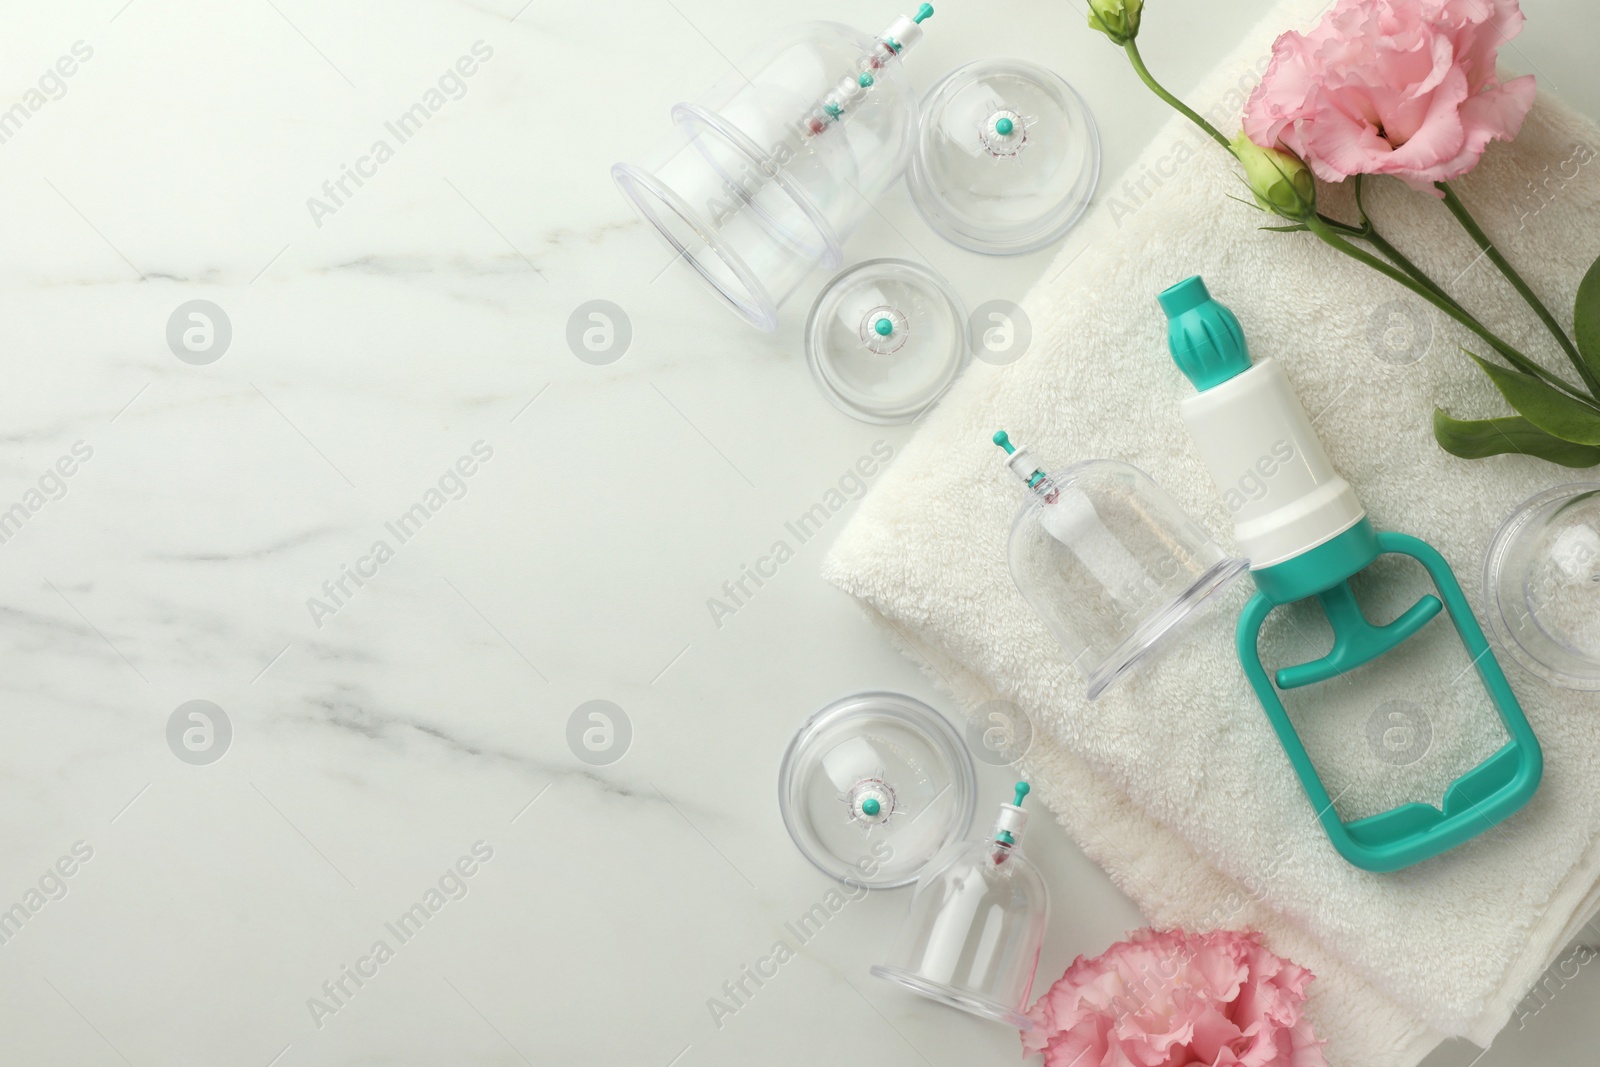 Photo of Plastic cups, hand pump, flowers and towel on white marble table, flat lay with space for text. Cupping therapy